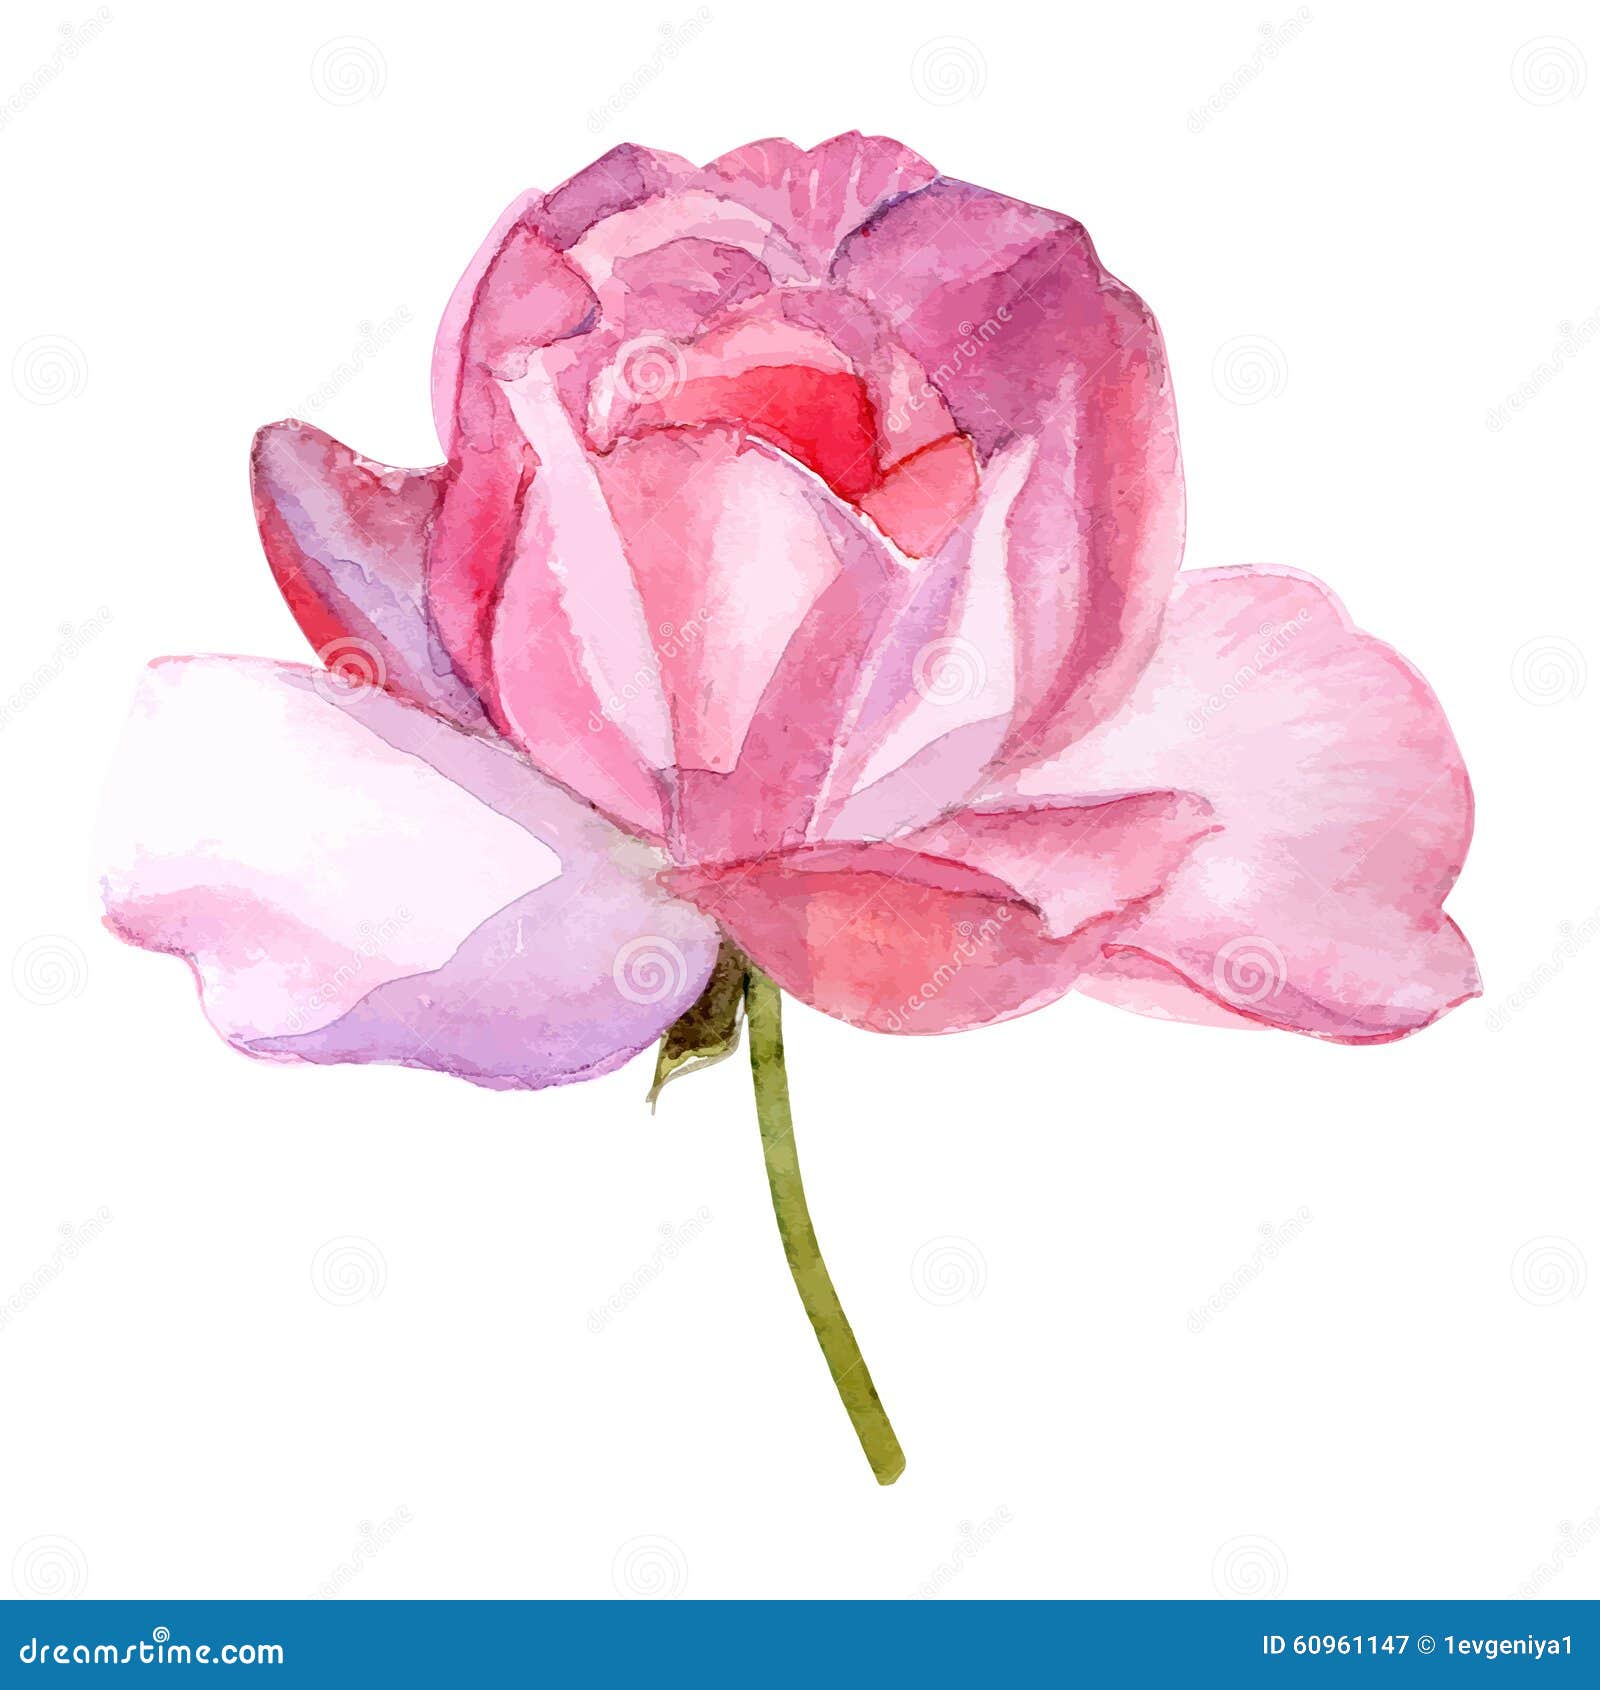 Watercolor Rosebud Isolated on White. Hand Draw Illustrations. Stock Image  - Image of drawing, birthday: 242555941